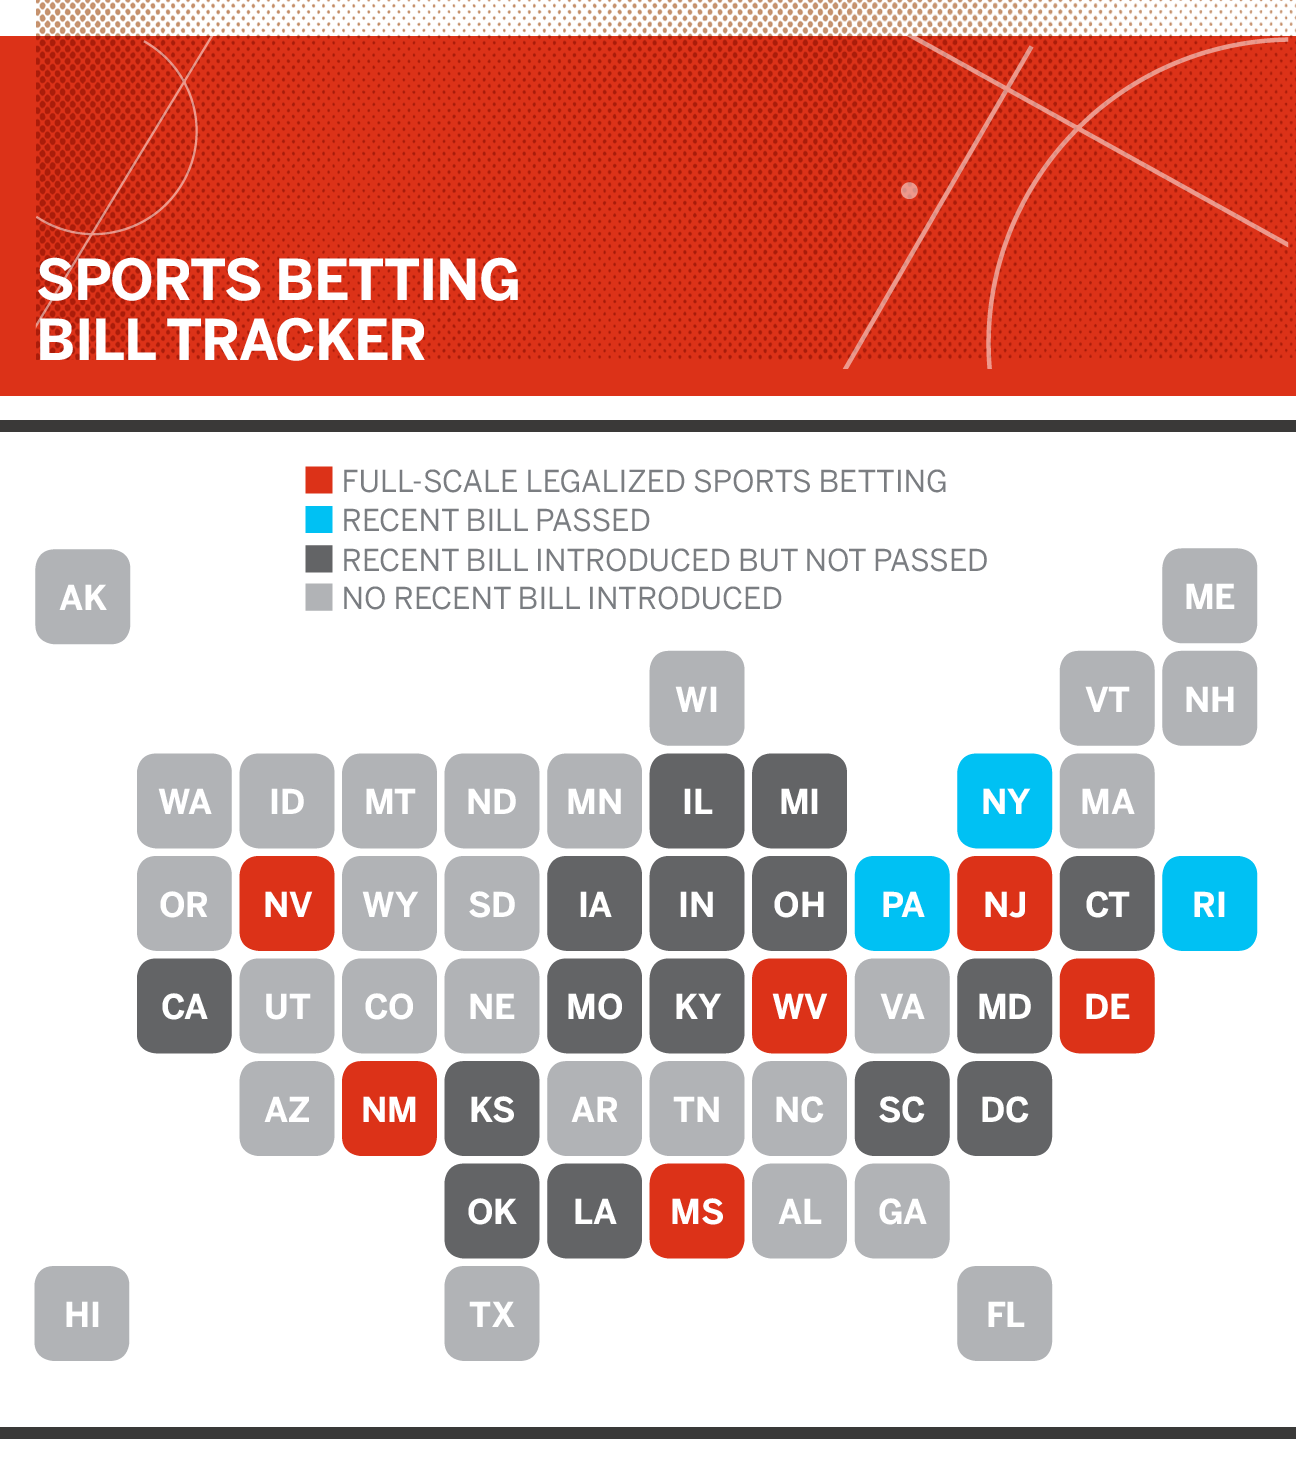 Gambling - Sports betting bill tracker for all 50 states